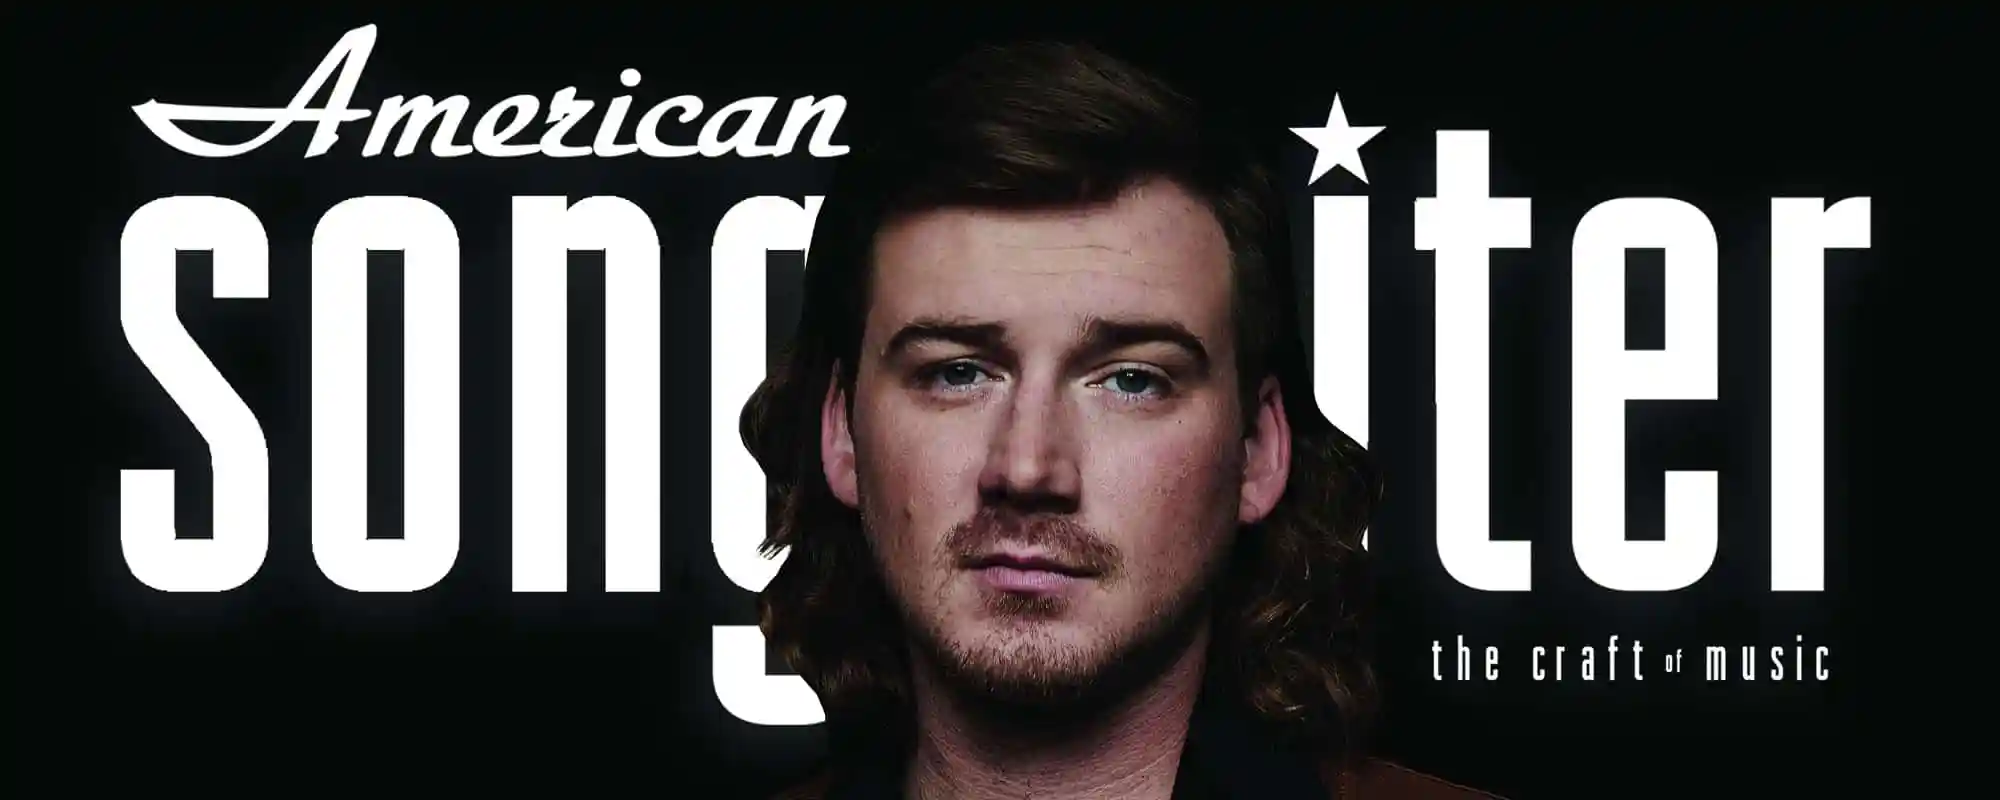 Morgan Wallen: From Small Town Boy To Big Country Star